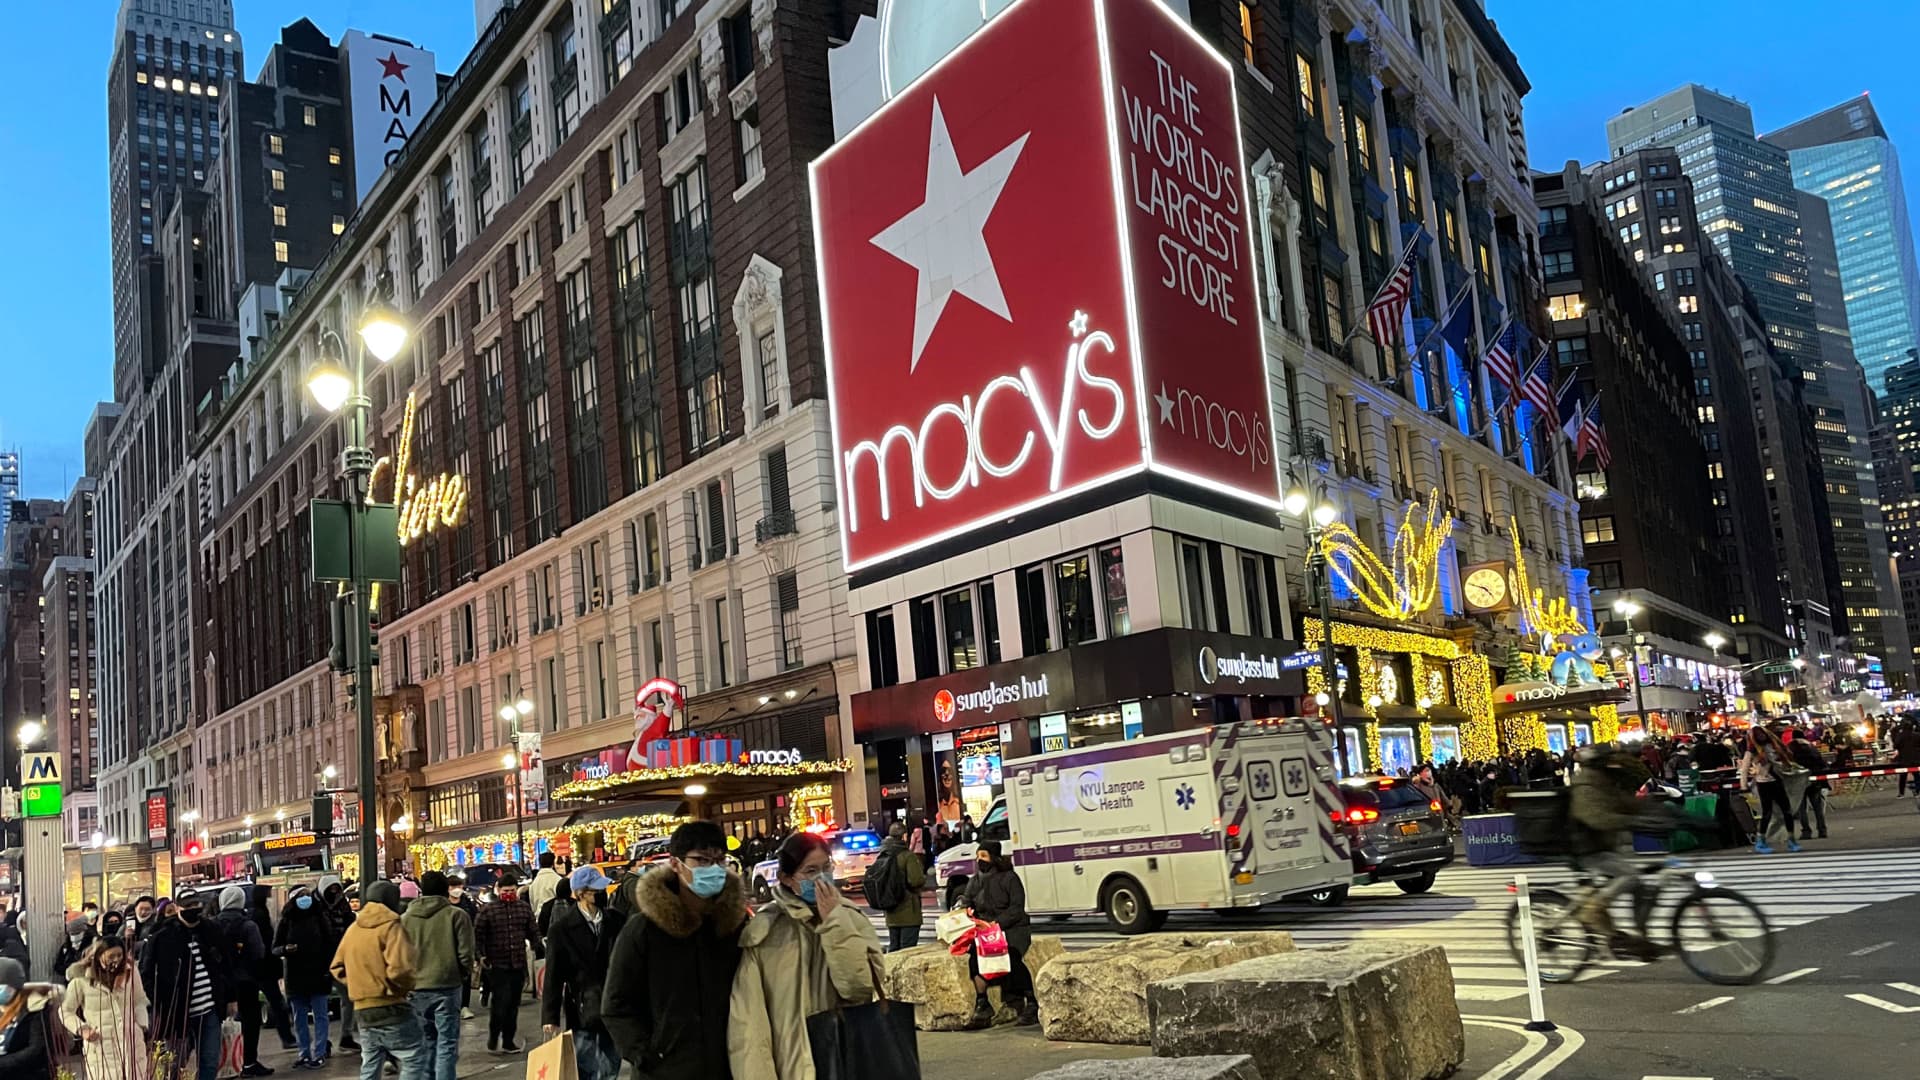 Macy's flagship store in Herald Square in New York, Dec. 23, 2021.